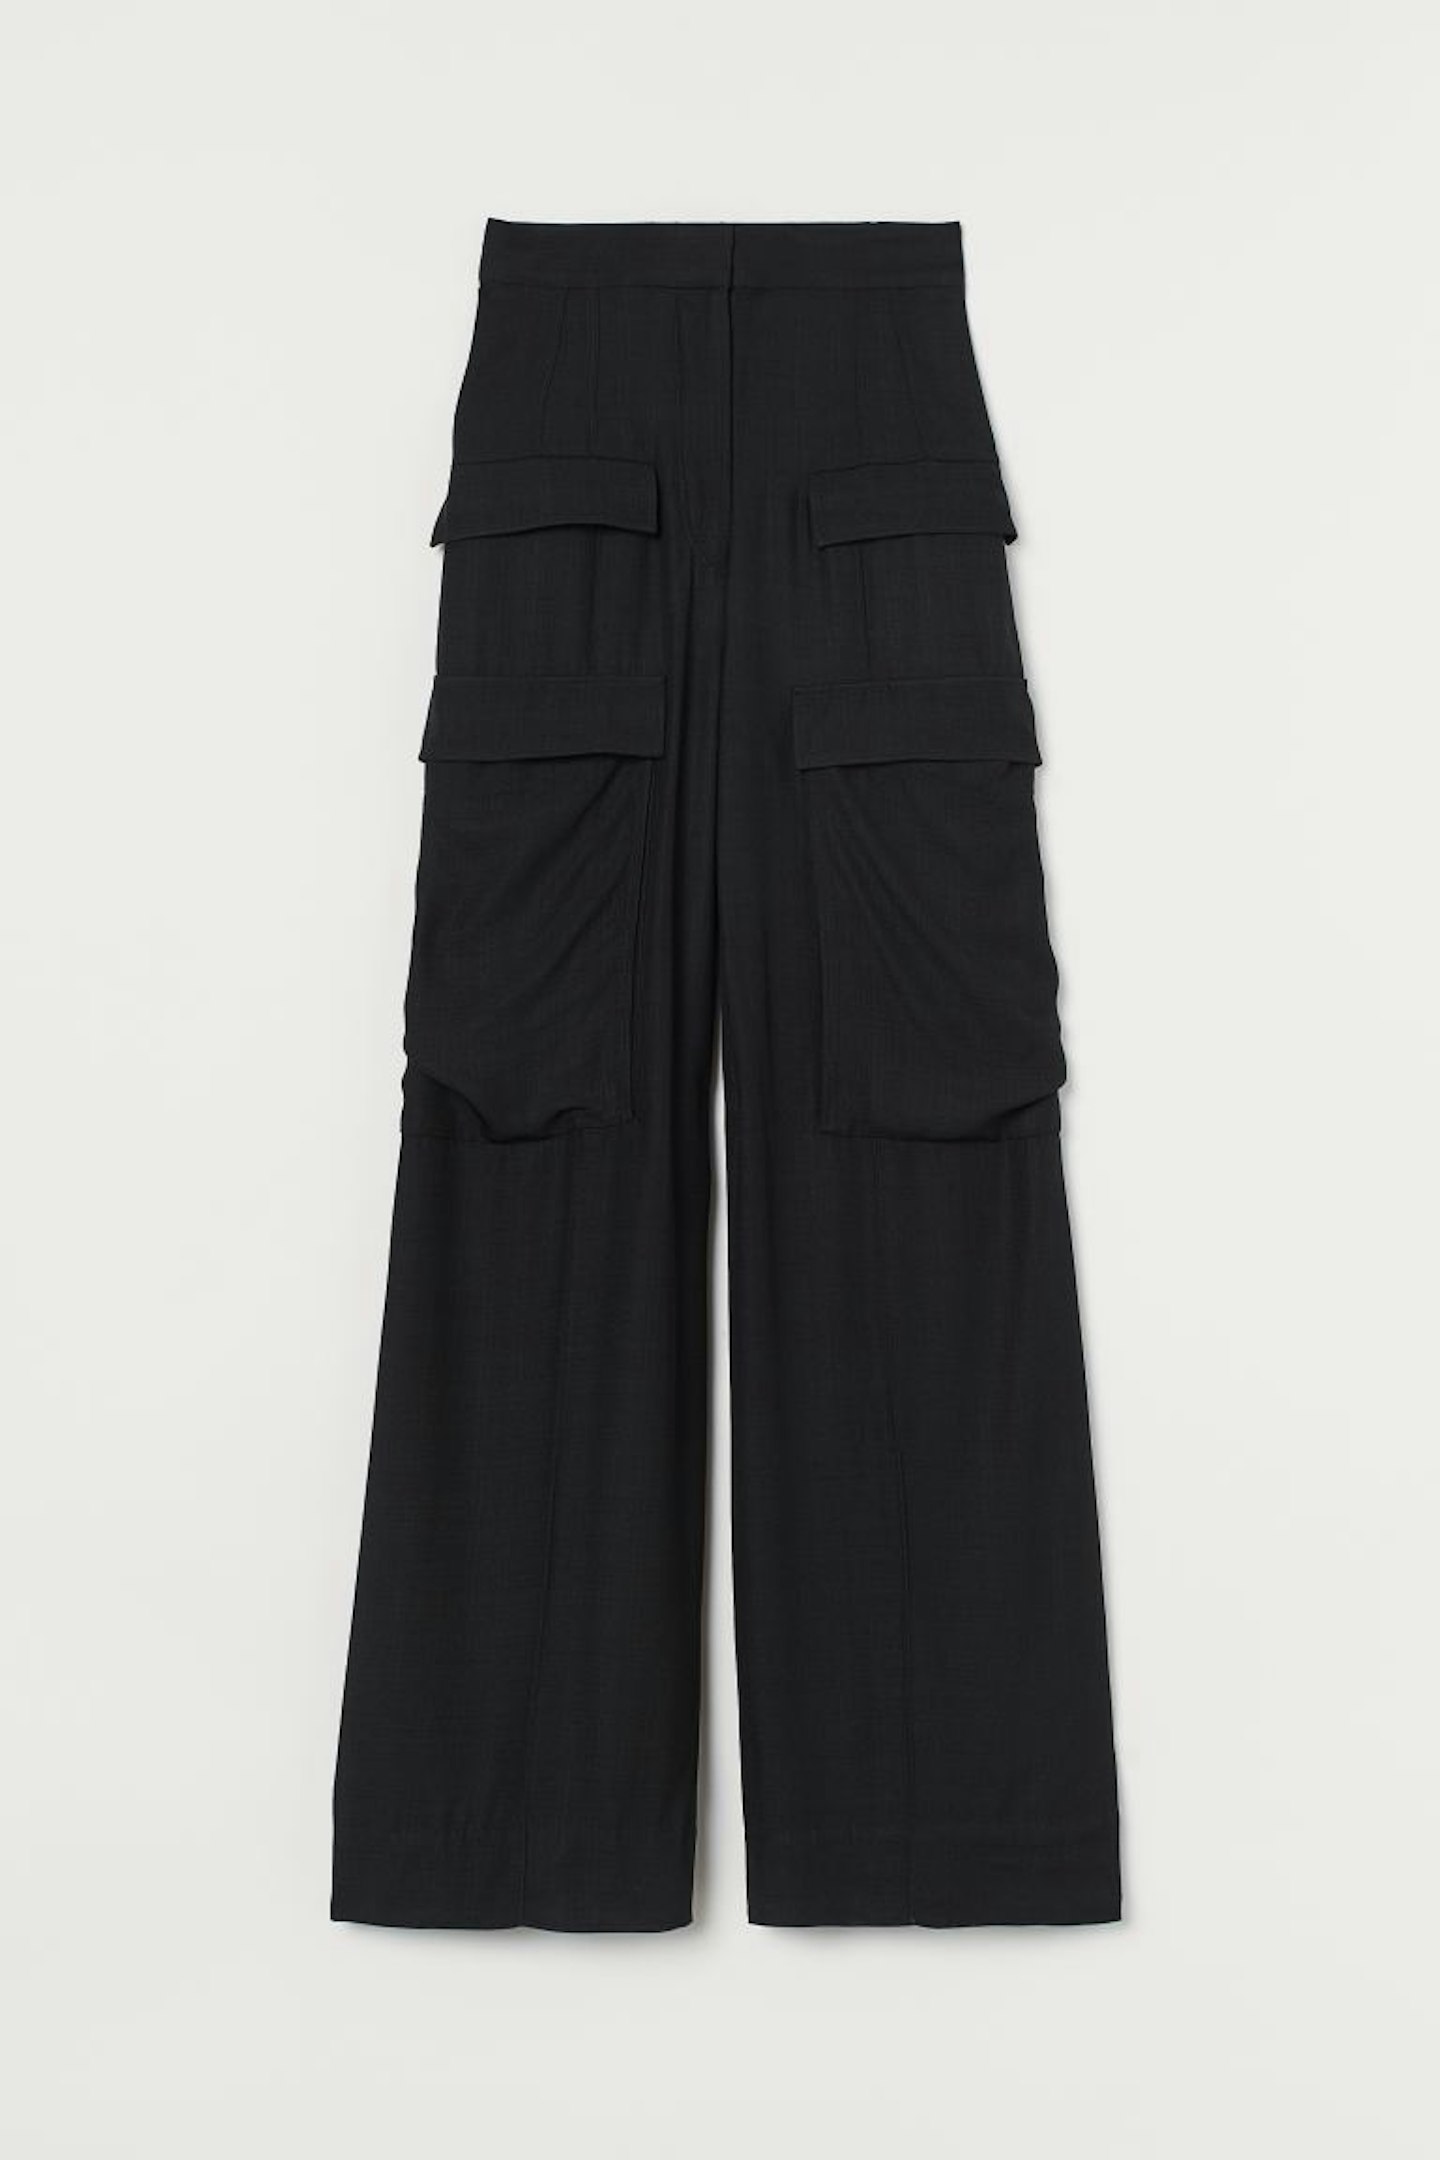 Oversized Utility Trousers, £79.99